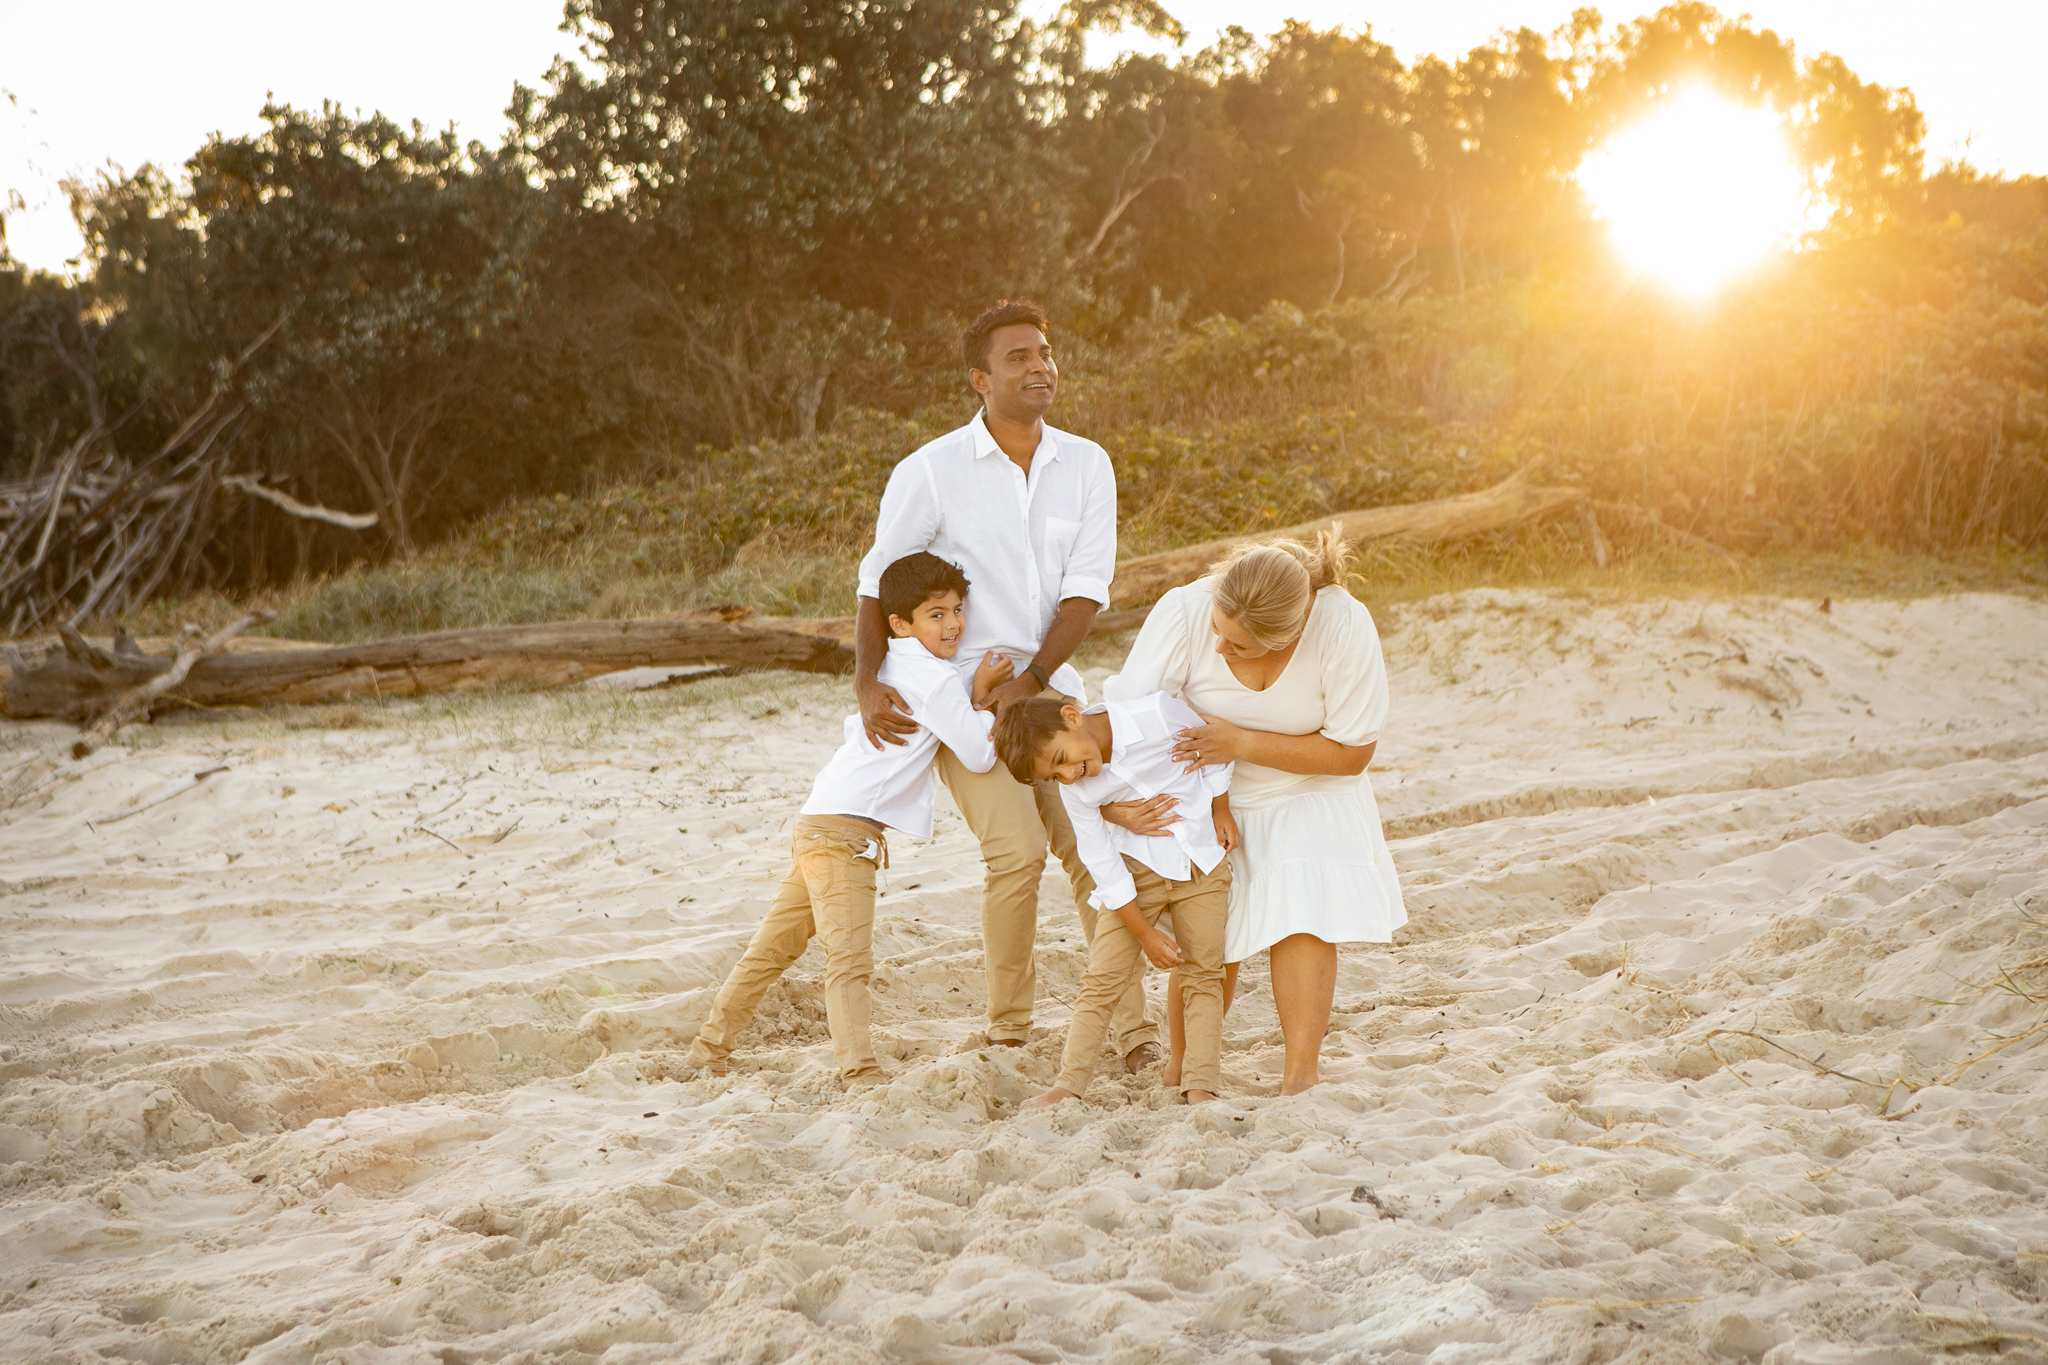 Family of four having a crazy, fun cuddle on the beach at sunset